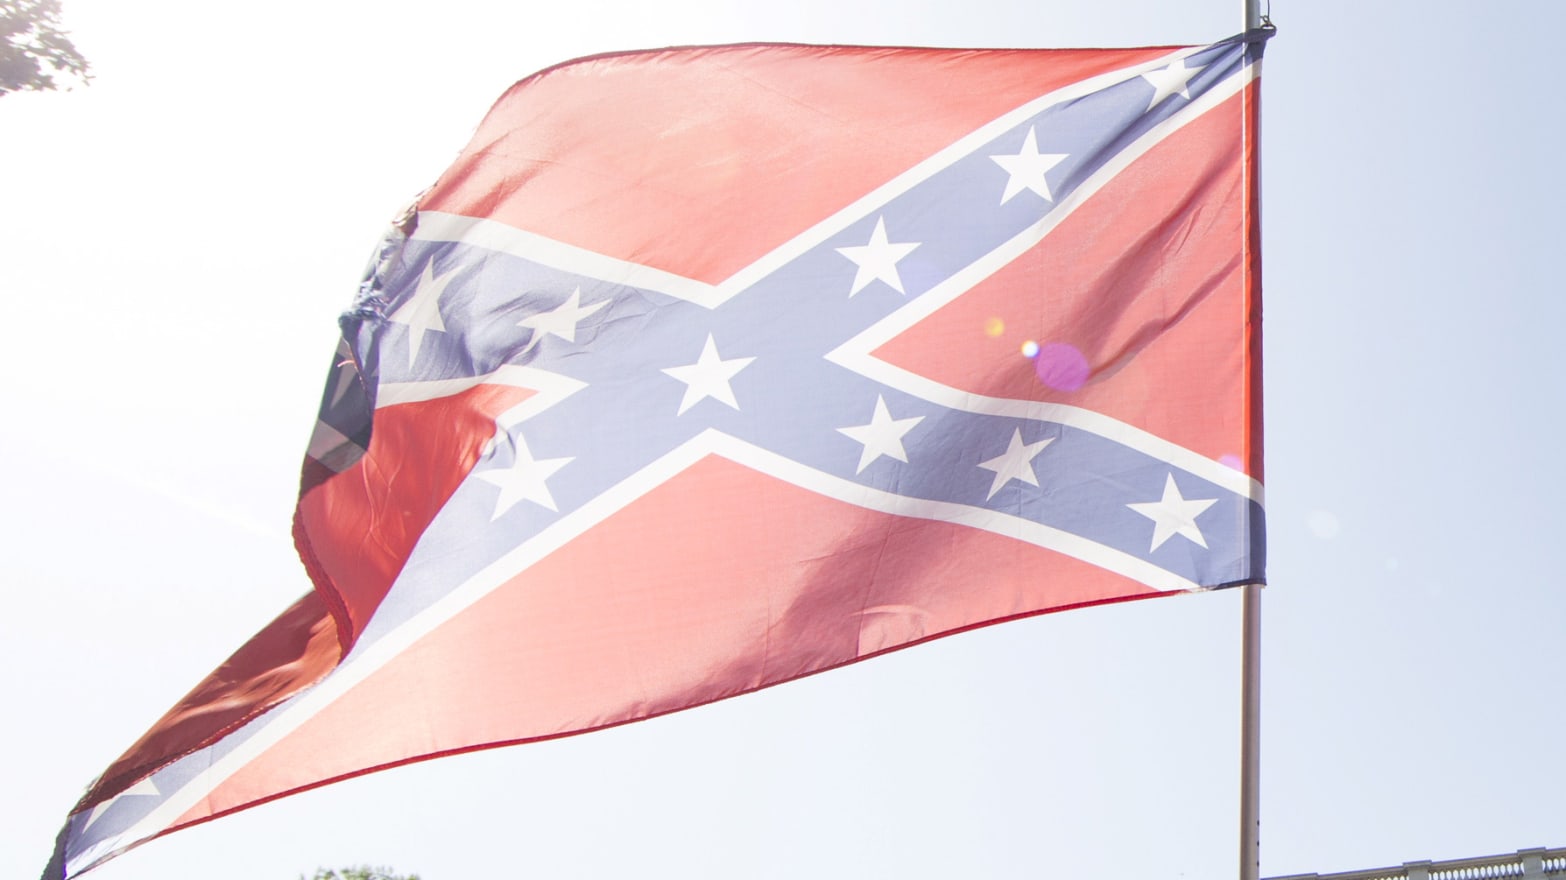 An image of the Confederate flag.